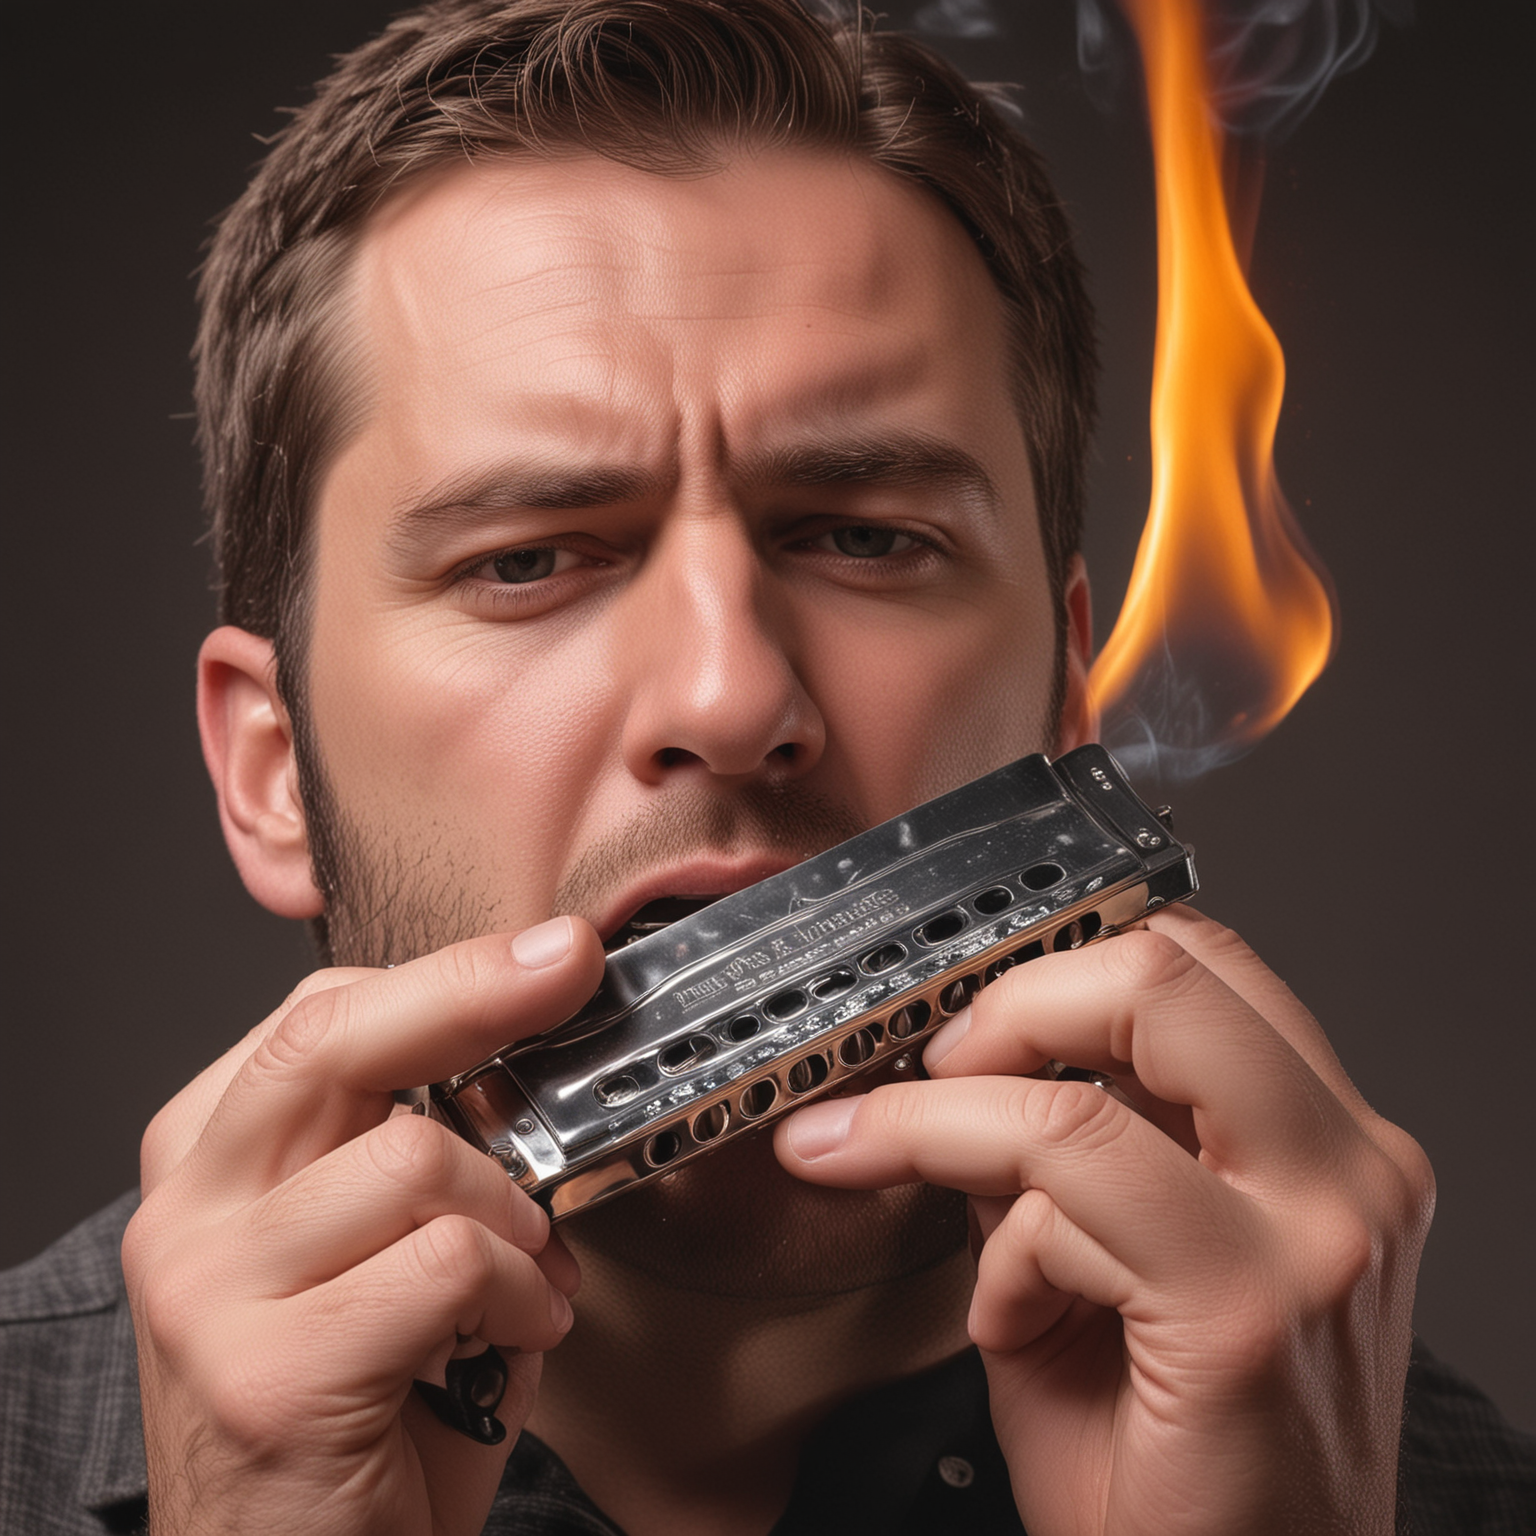 Person Playing Harmonica with Flaming Hand